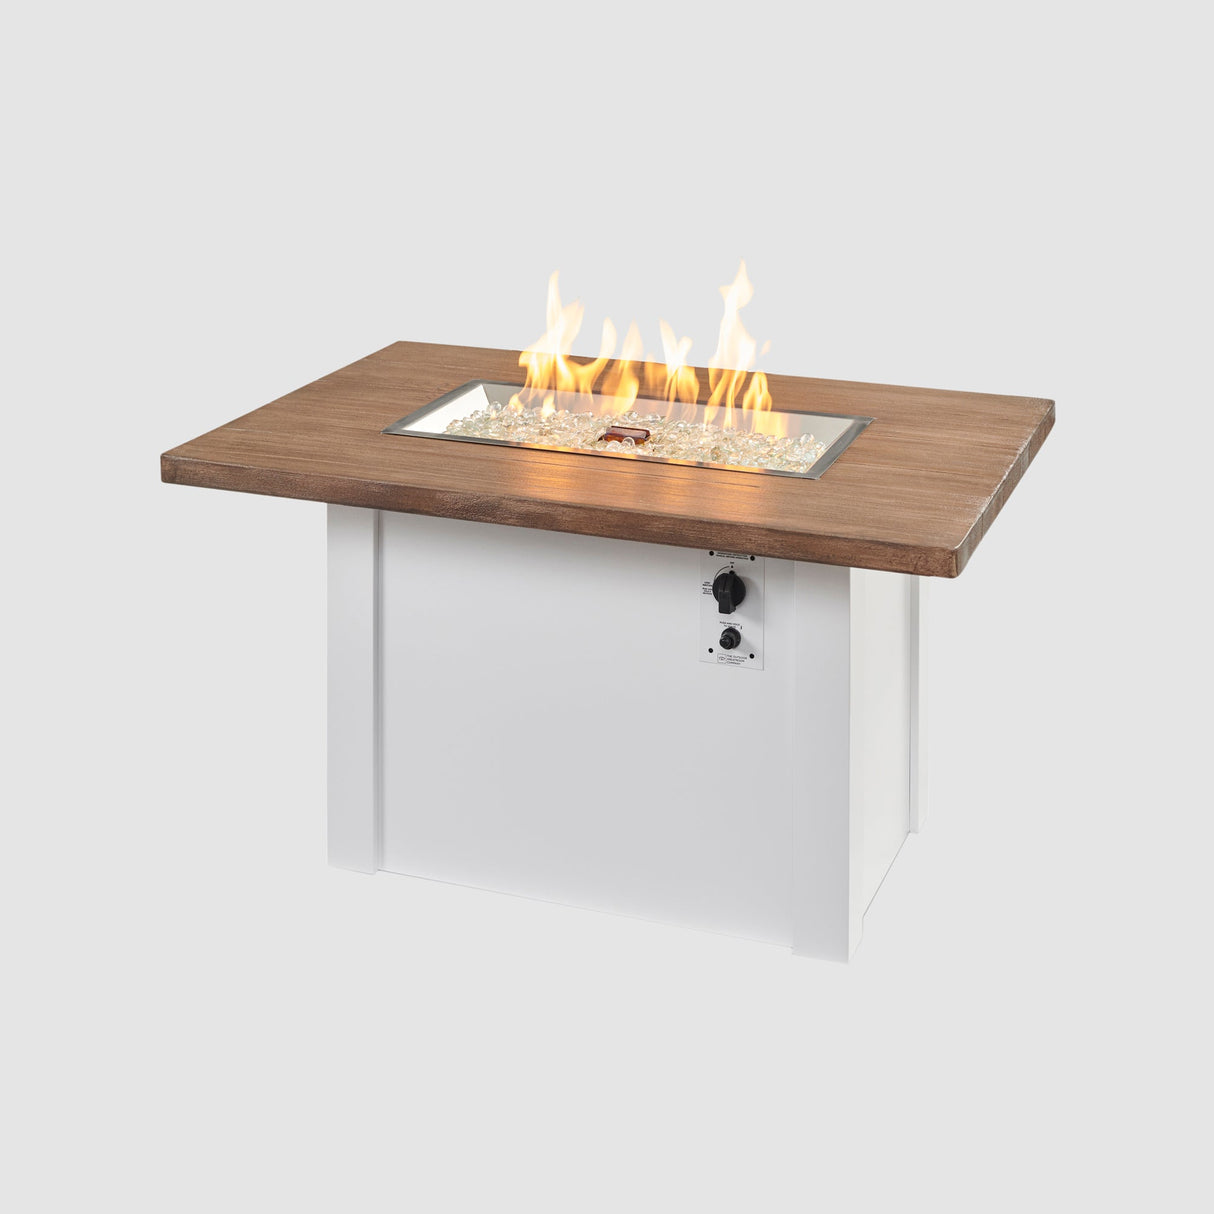 A large flame coming off the burner of a Havenwood Rectangular Gas Fire Pit Table with a Driftwood top and White base